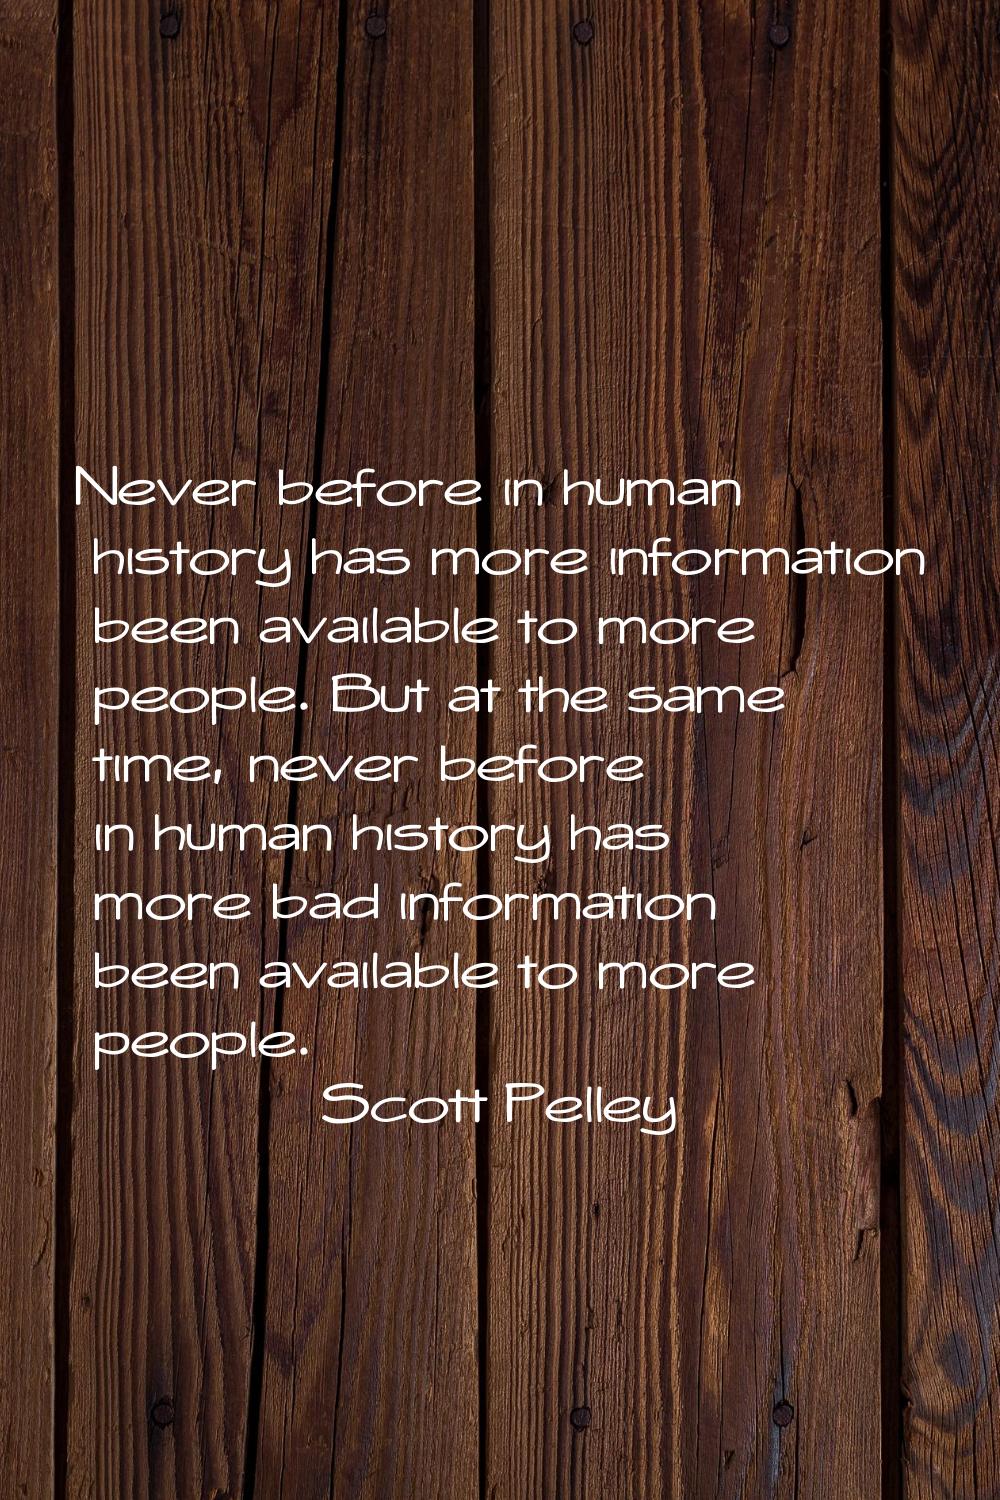 Never before in human history has more information been available to more people. But at the same t